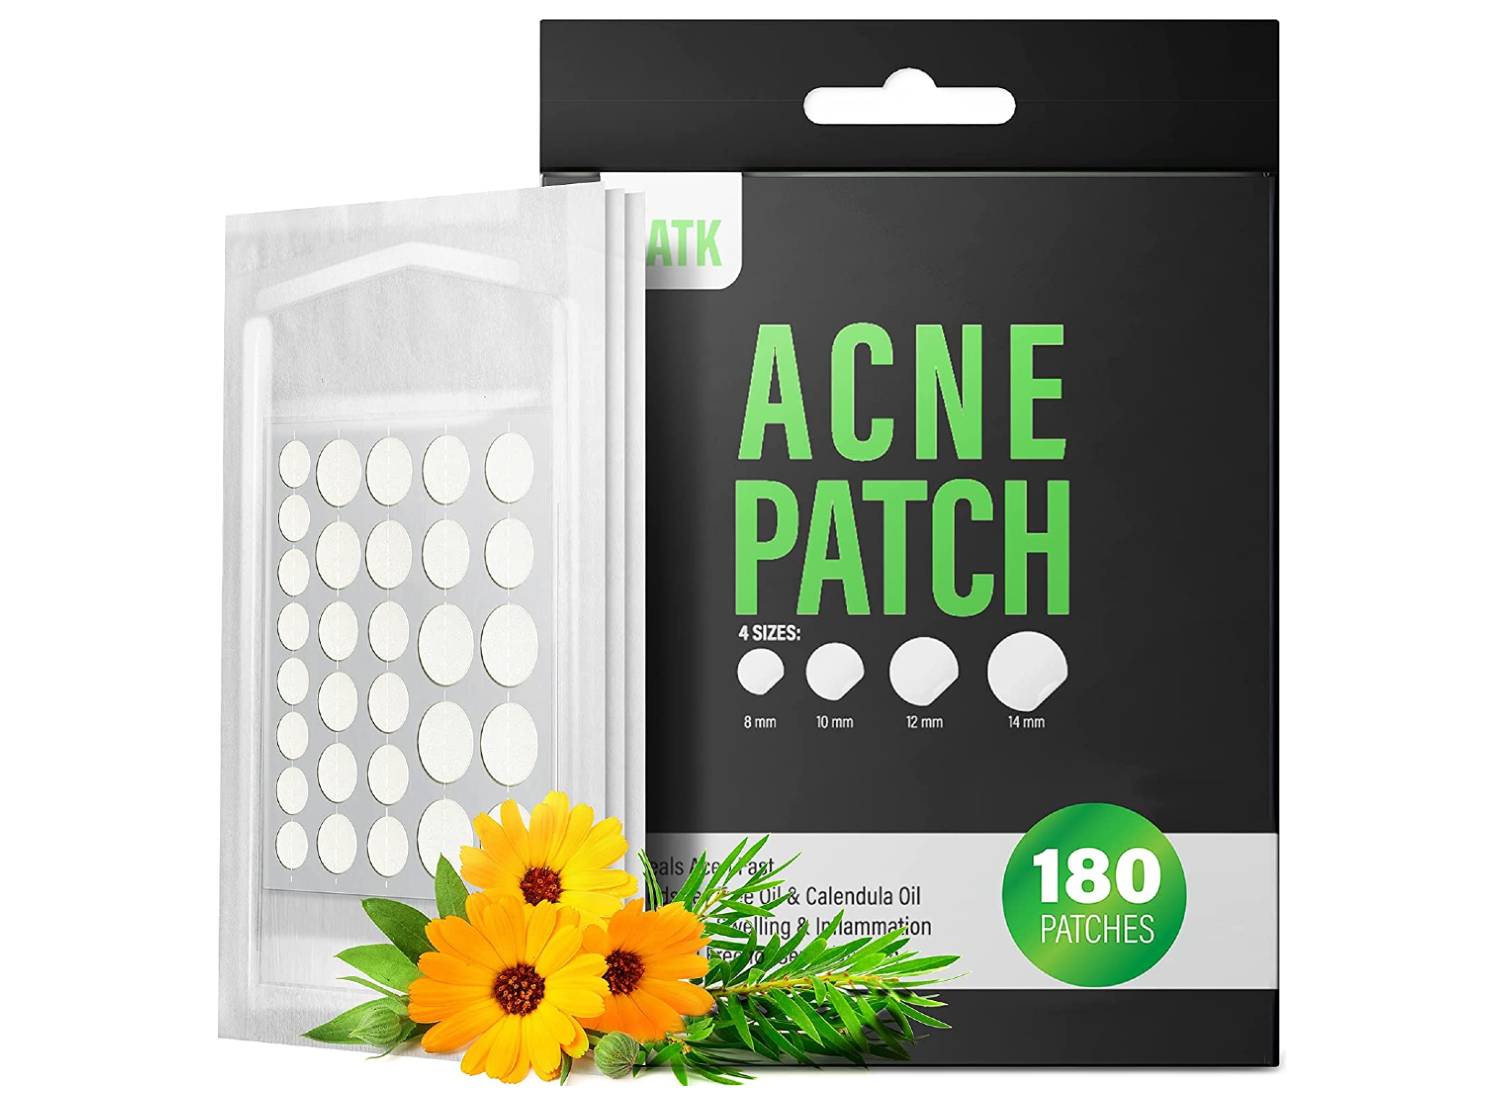 Box of different sized pimple patches